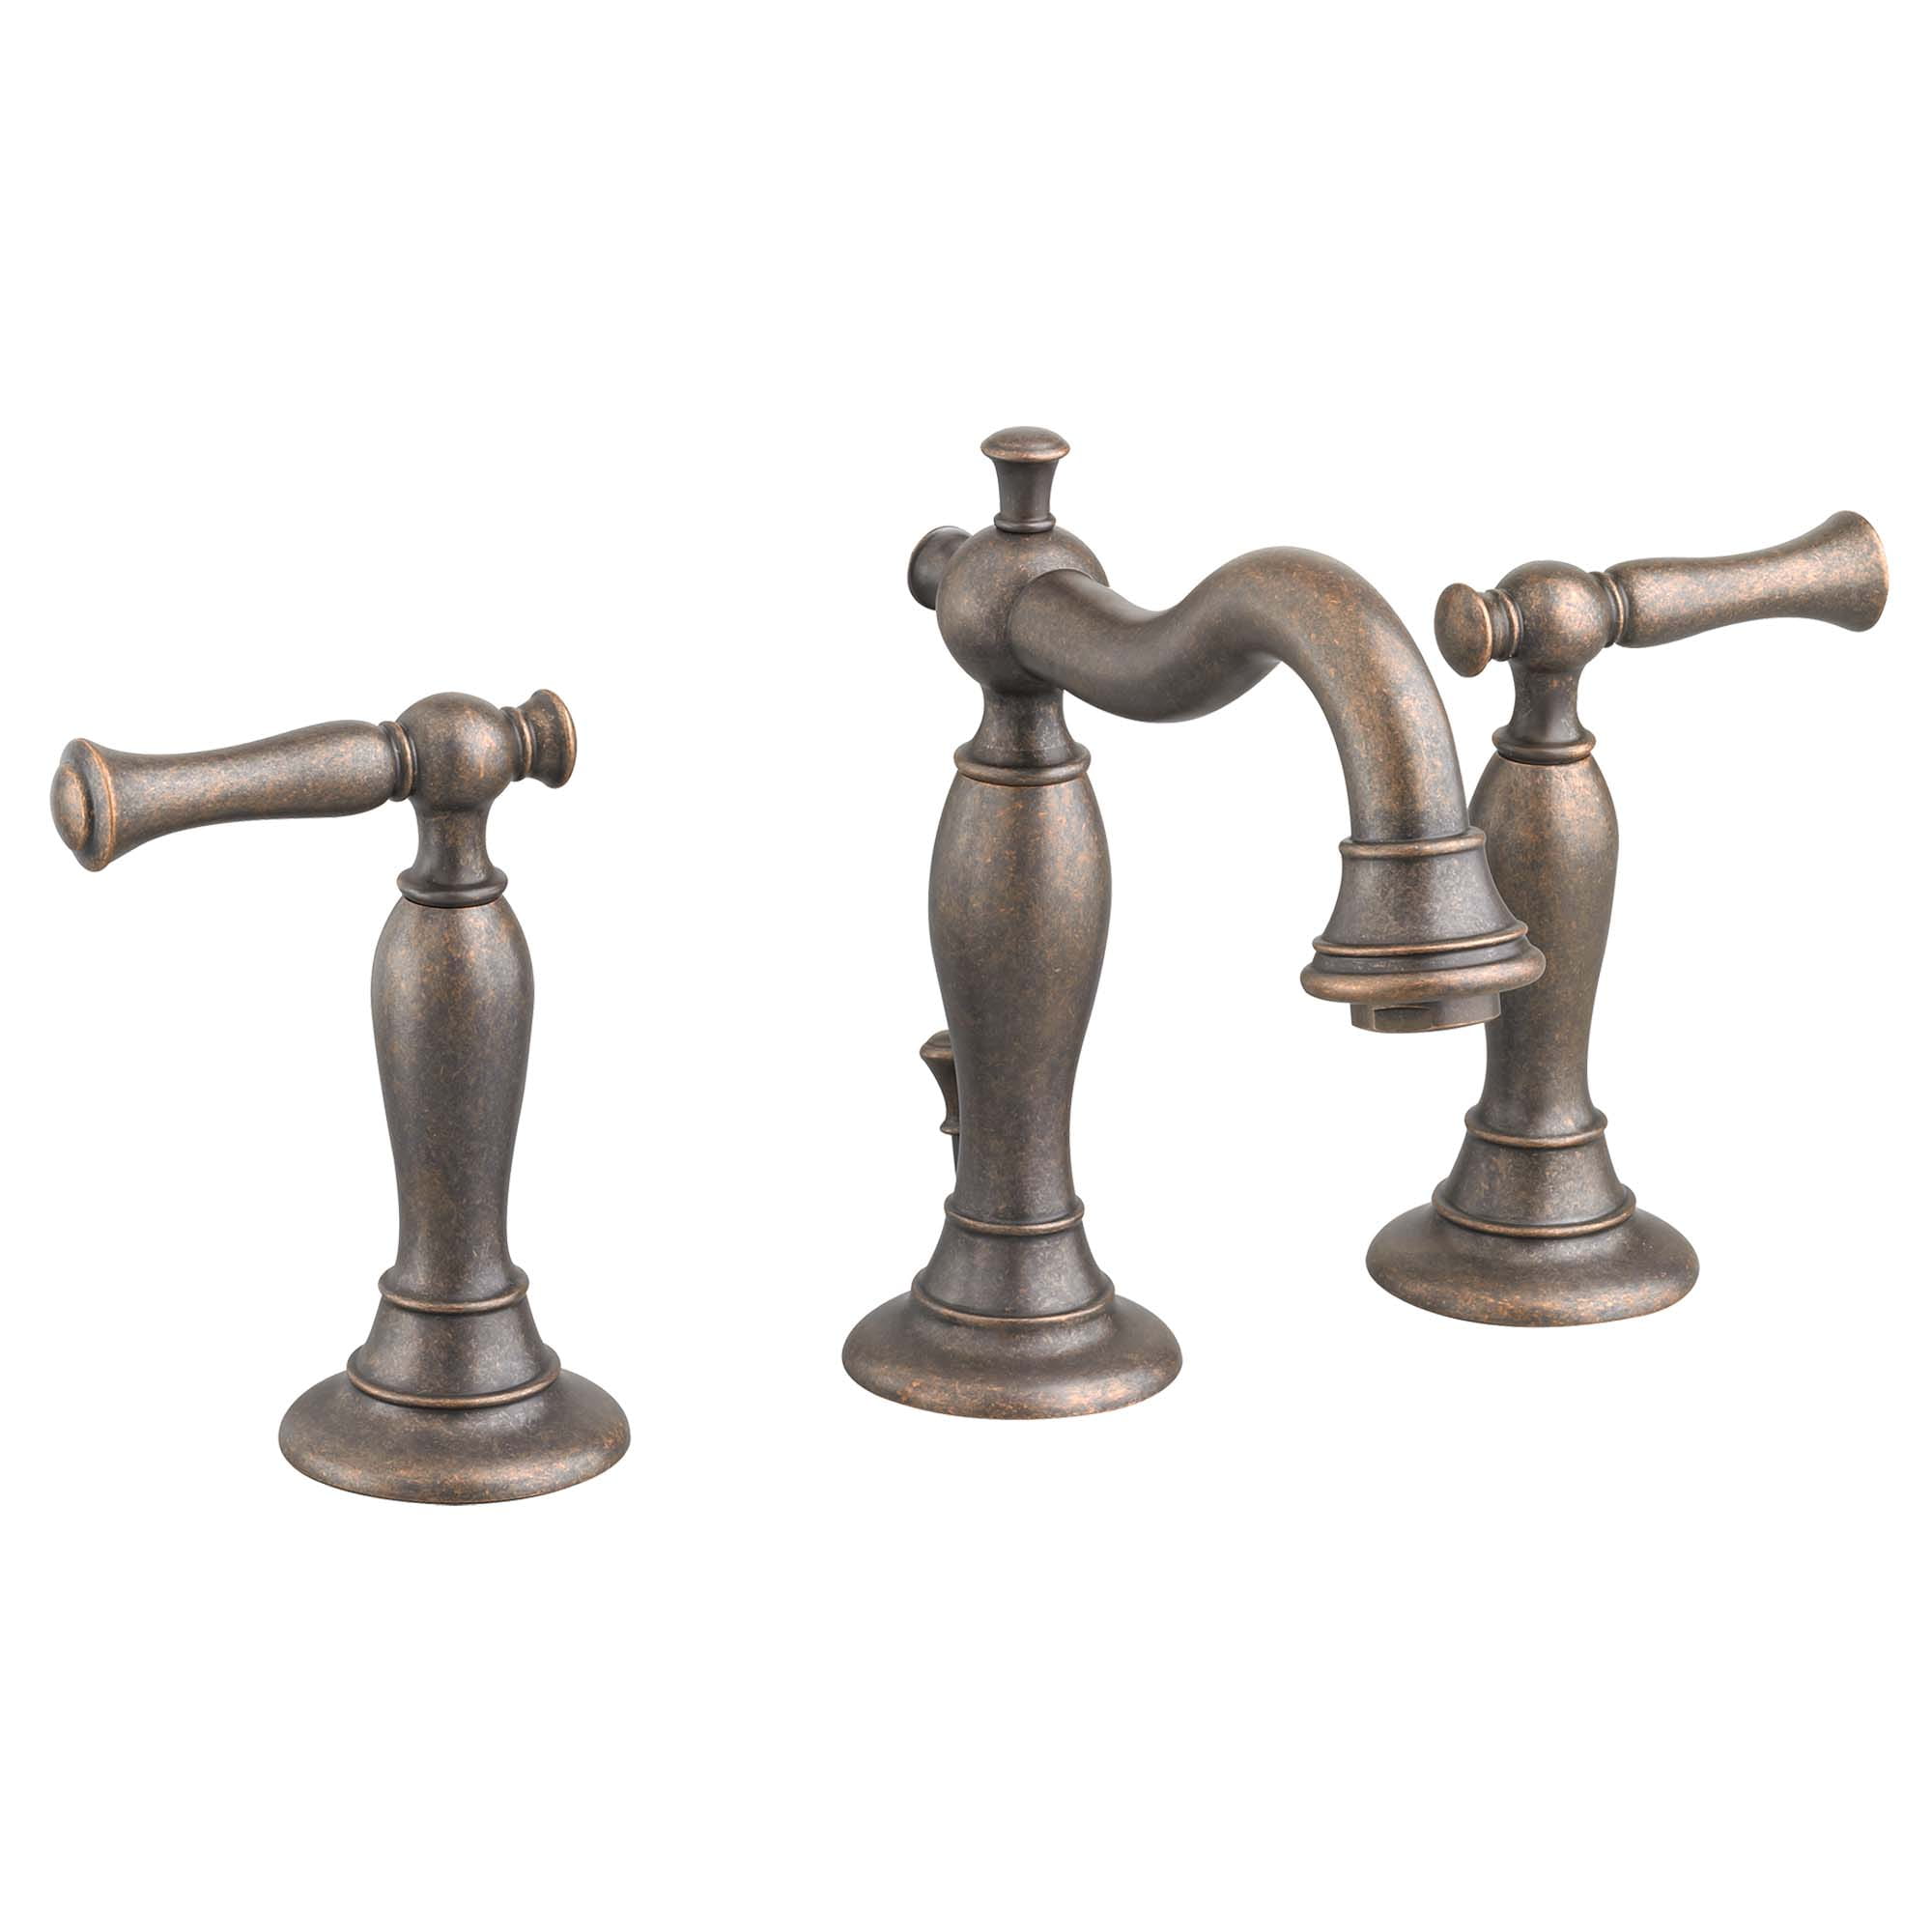 Quentin 8 Inch Widespread 2 Handle Bathroom Faucet 12 gpm 45 L min With Lever Handles OIL RUBBED BRONZE